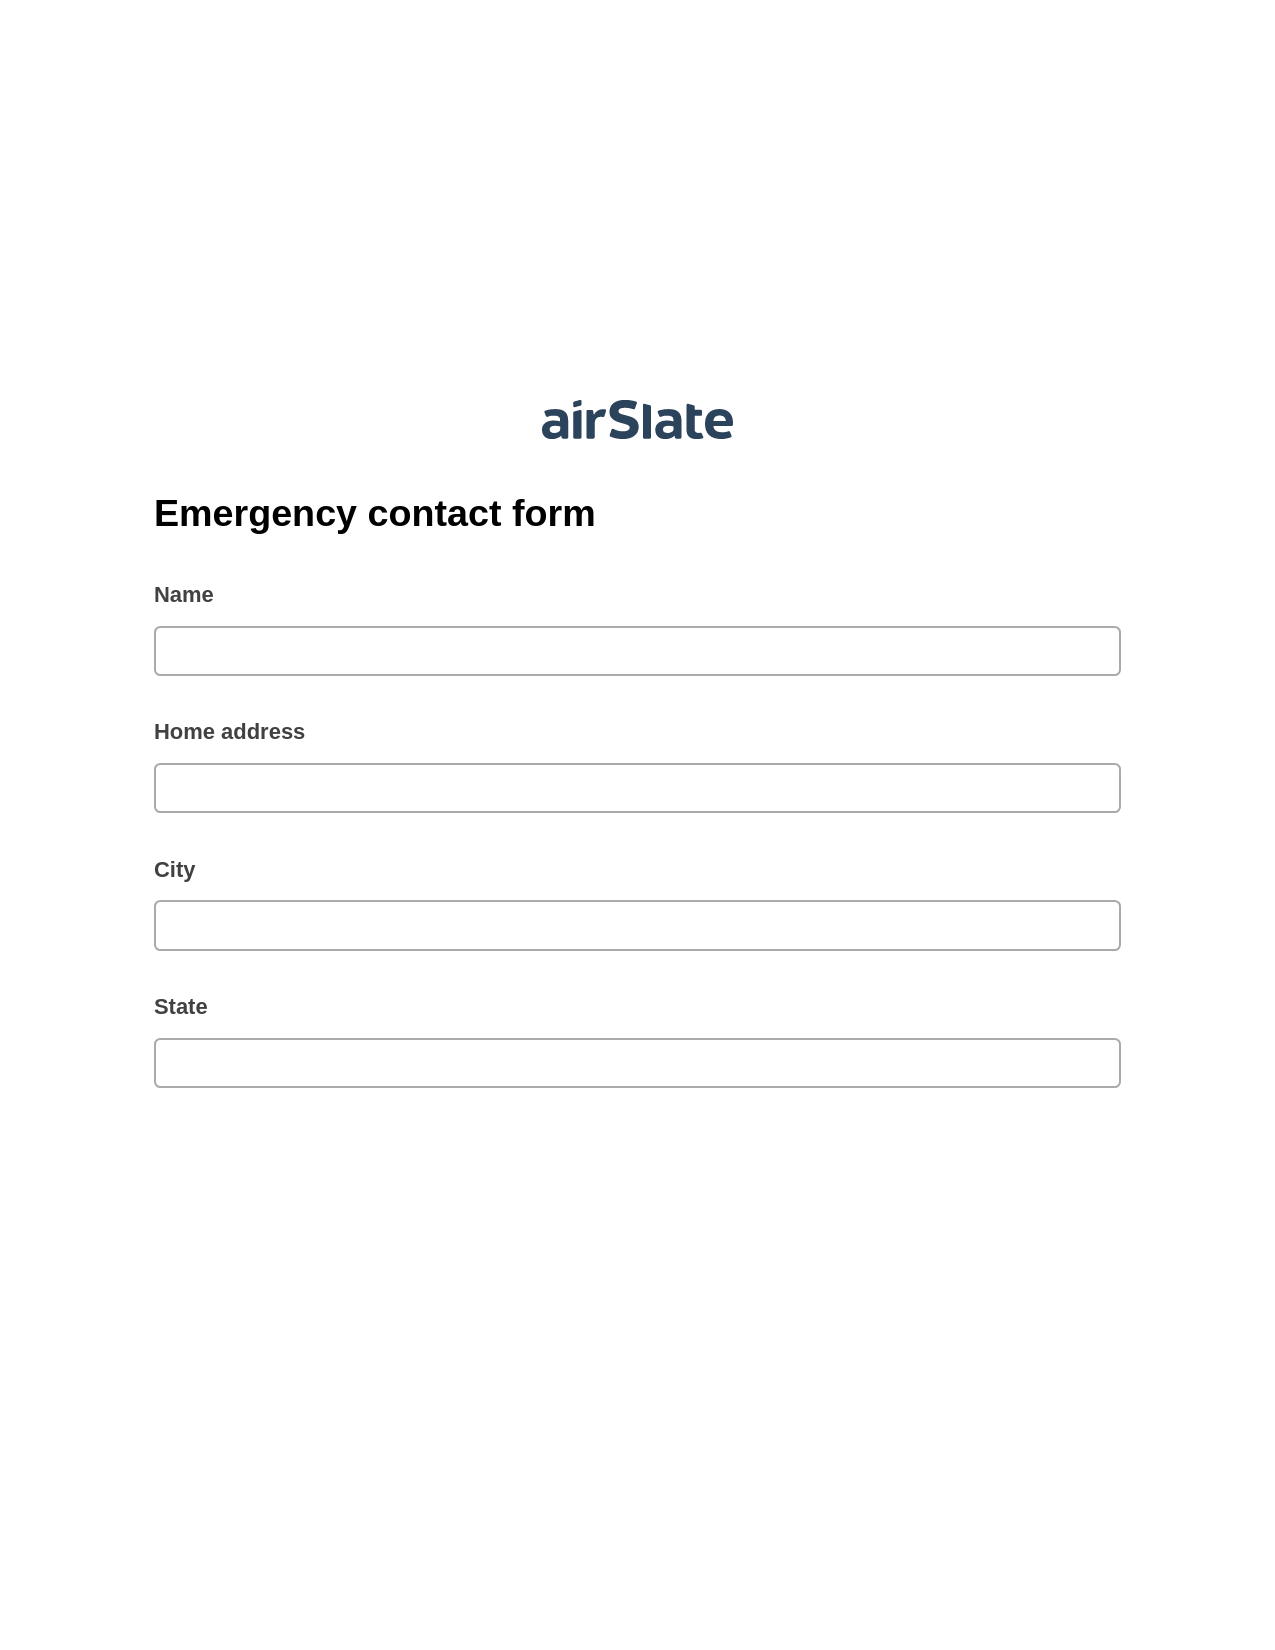 Emergency contact form Pre-fill Slate from MS Dynamics 365 Records Bot, Open as Role Bot, Export to Formstack Documents Bot